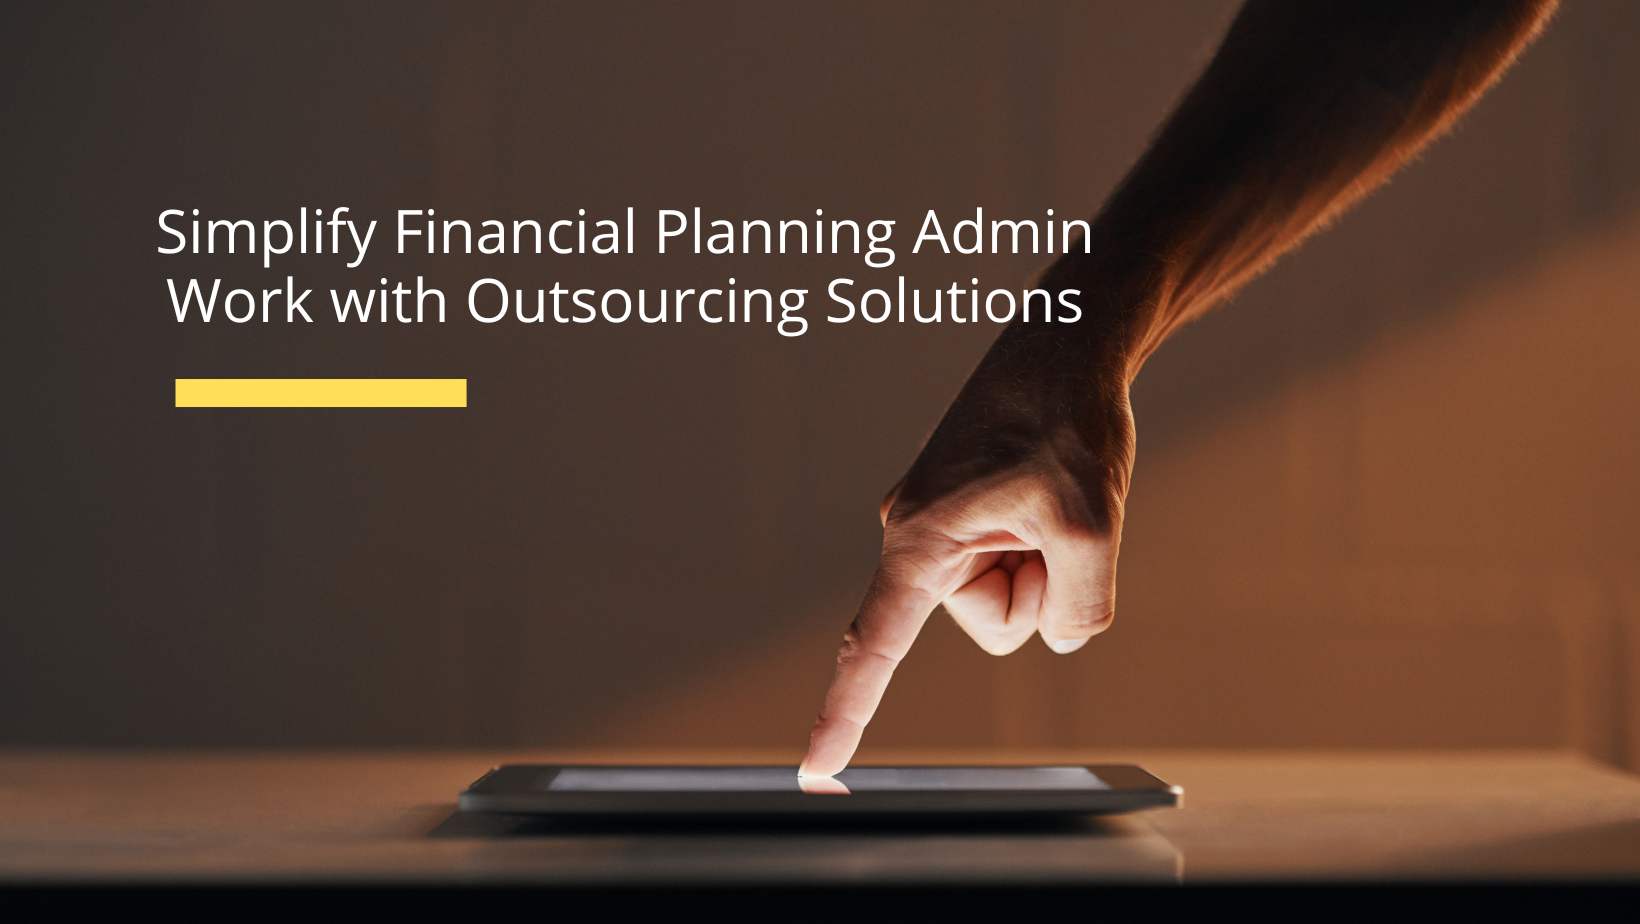 Outsourcing Financial Planning Admin Work: Simplify Business